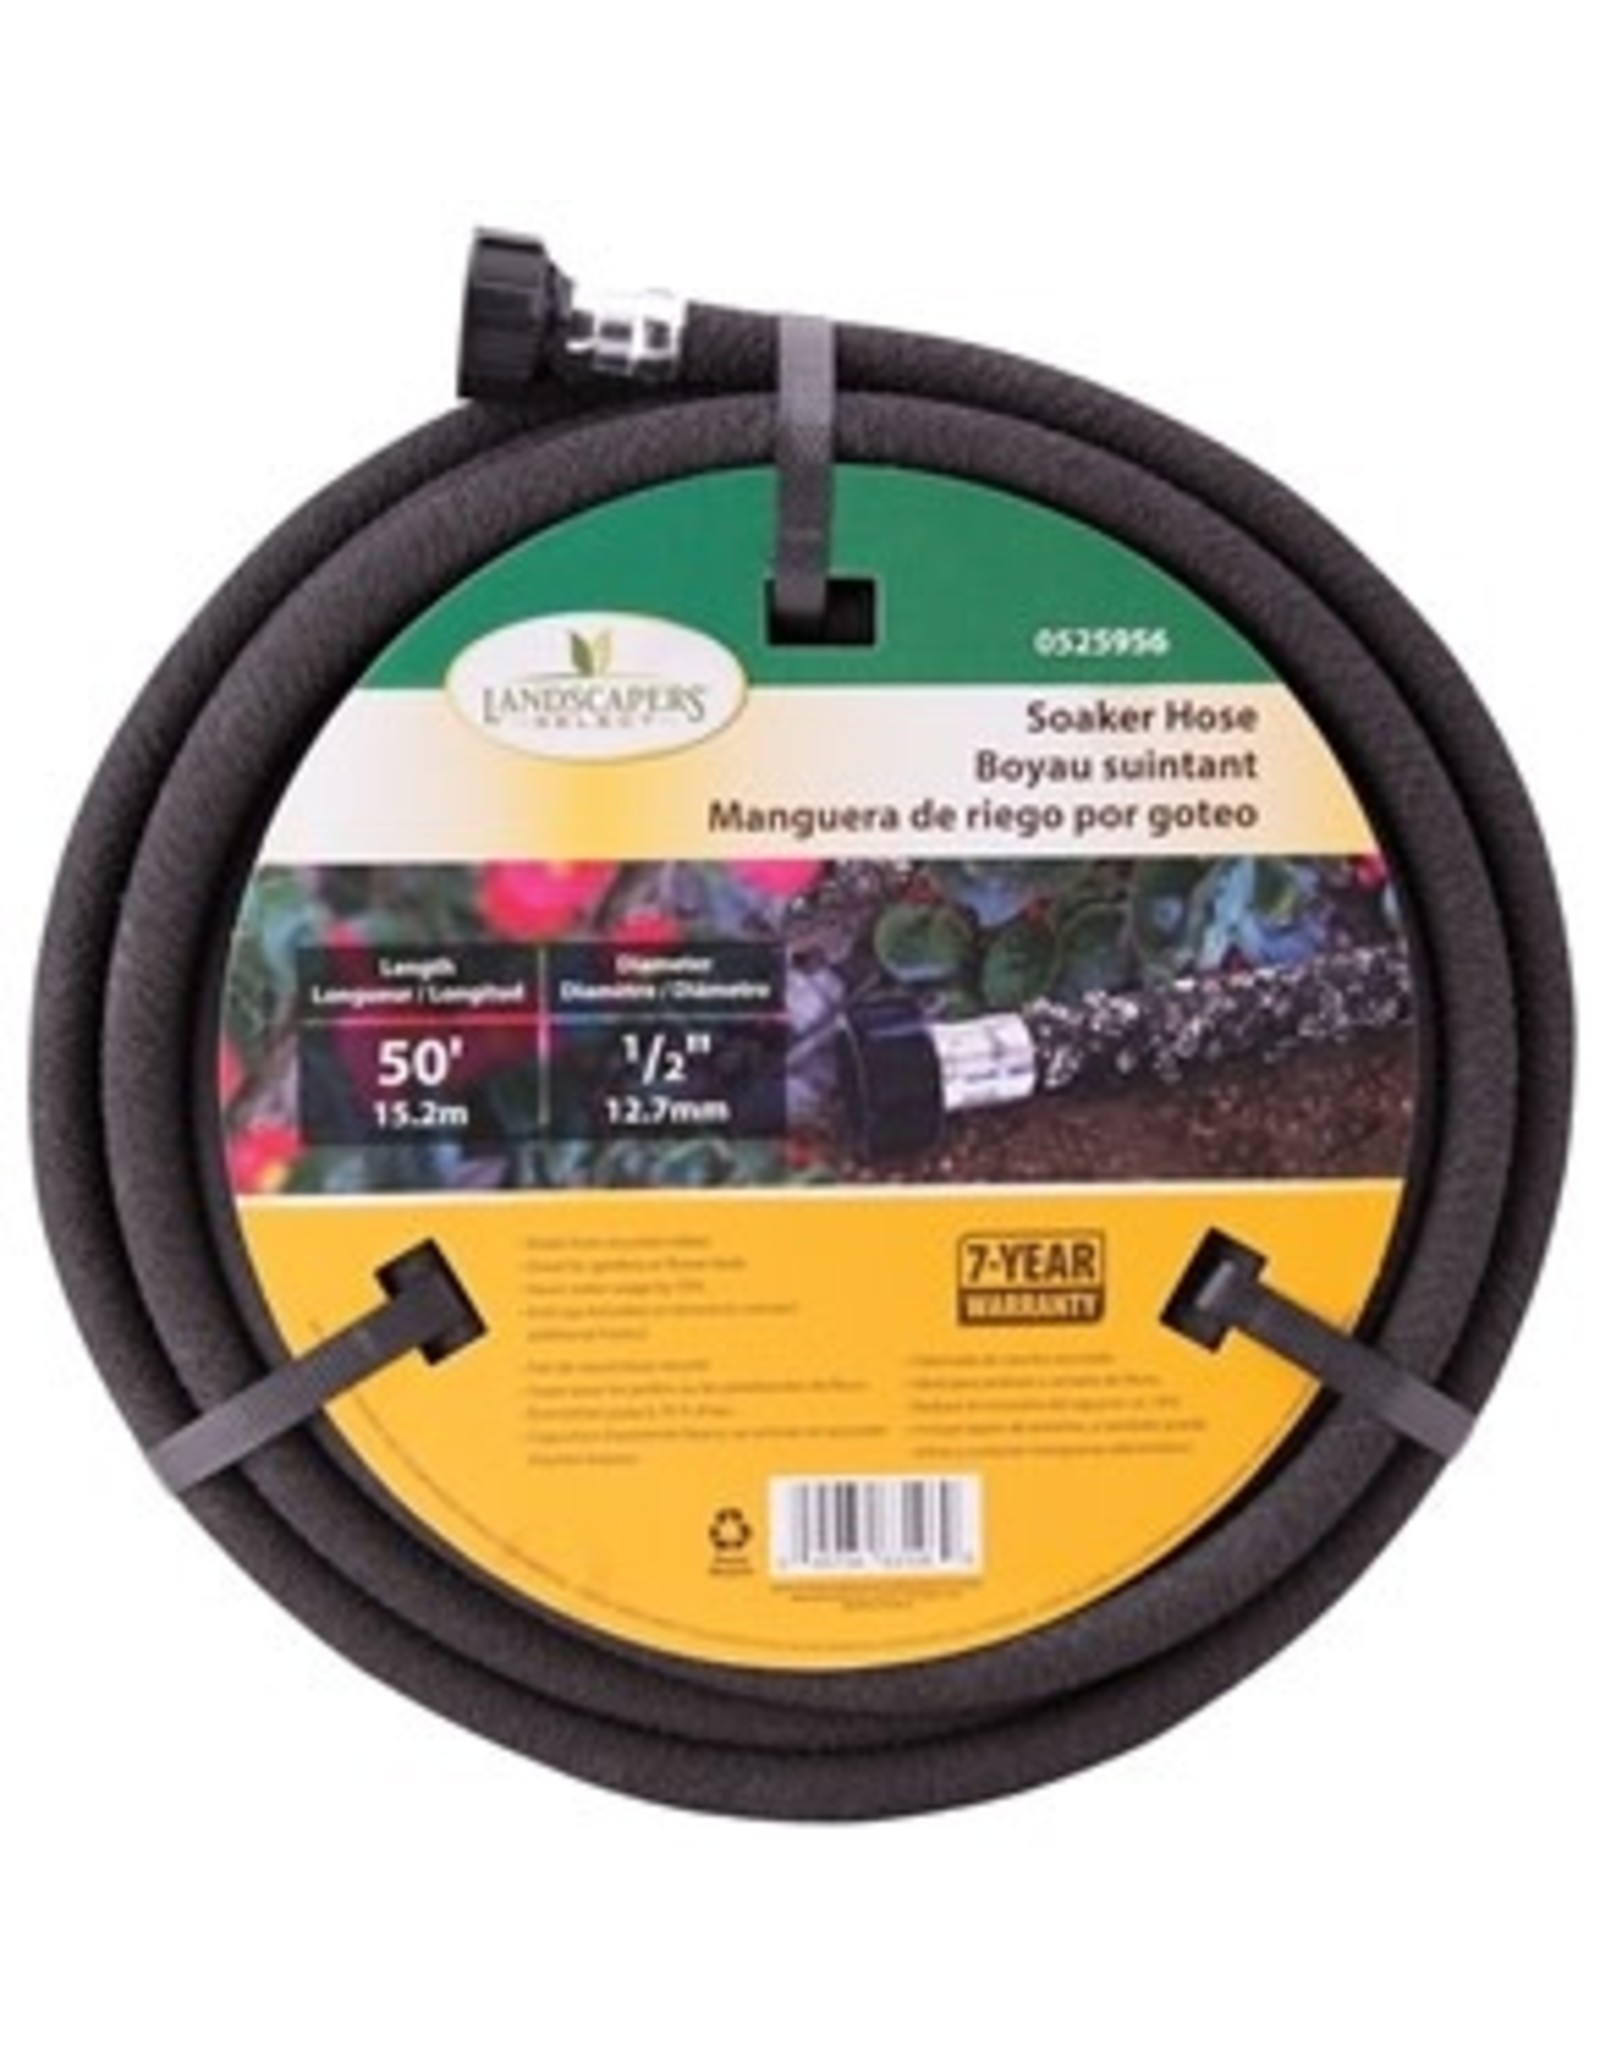 Landscapers Select Landscapers Select P174-161102 Soaker Hose, 50 ft L, Plastic Male and Female Couplings, Rubber, Black*